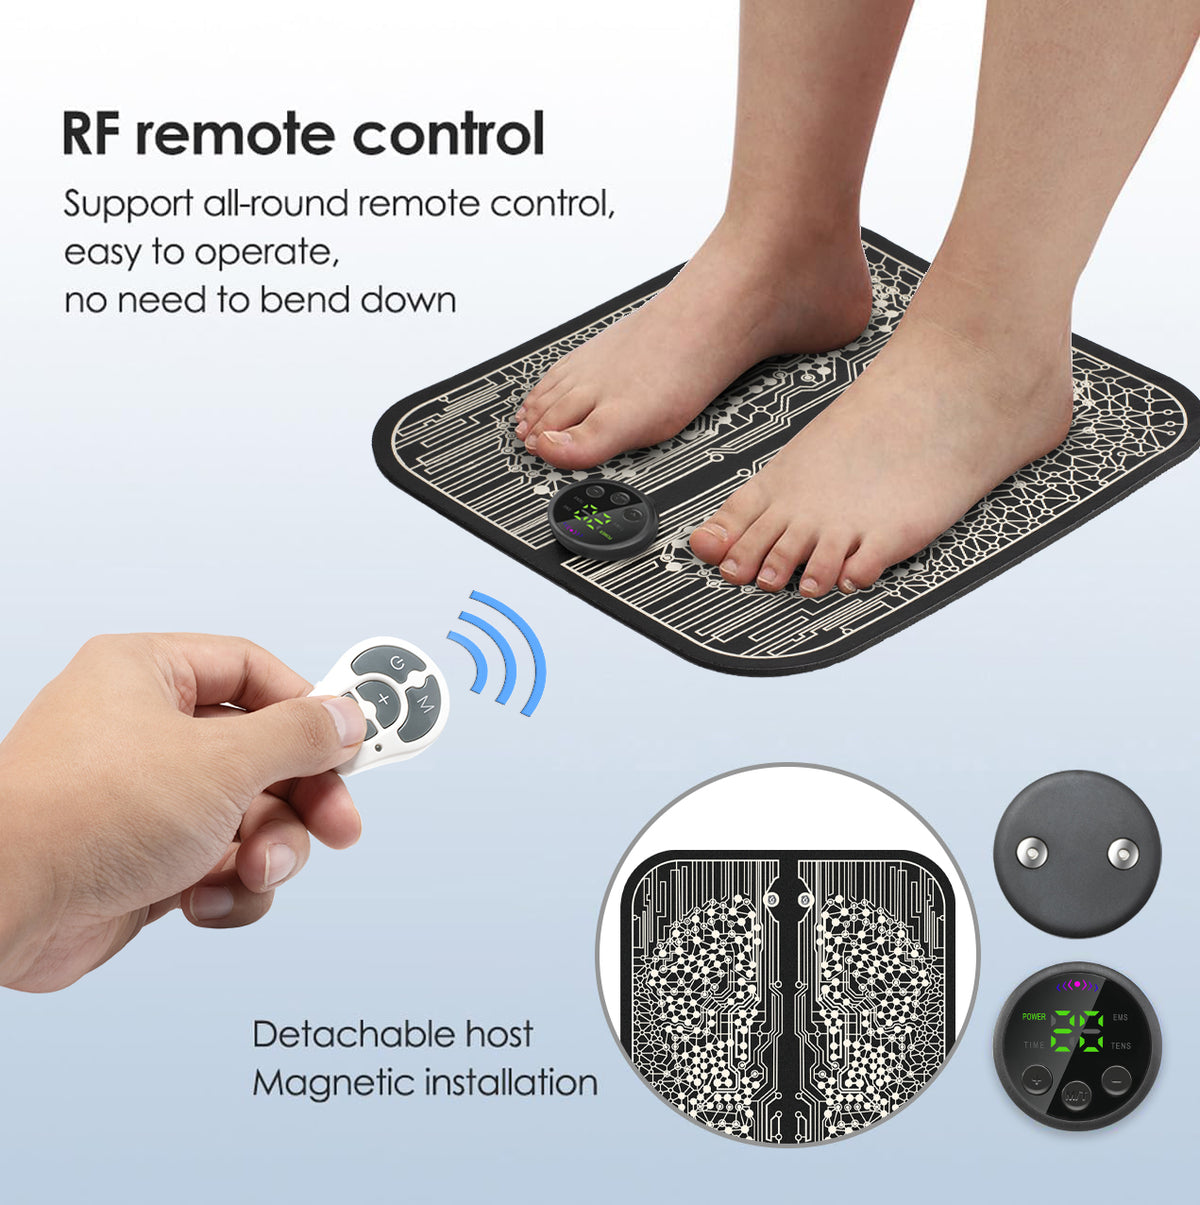 Remote-Controlled EMS Foot Massage Pad